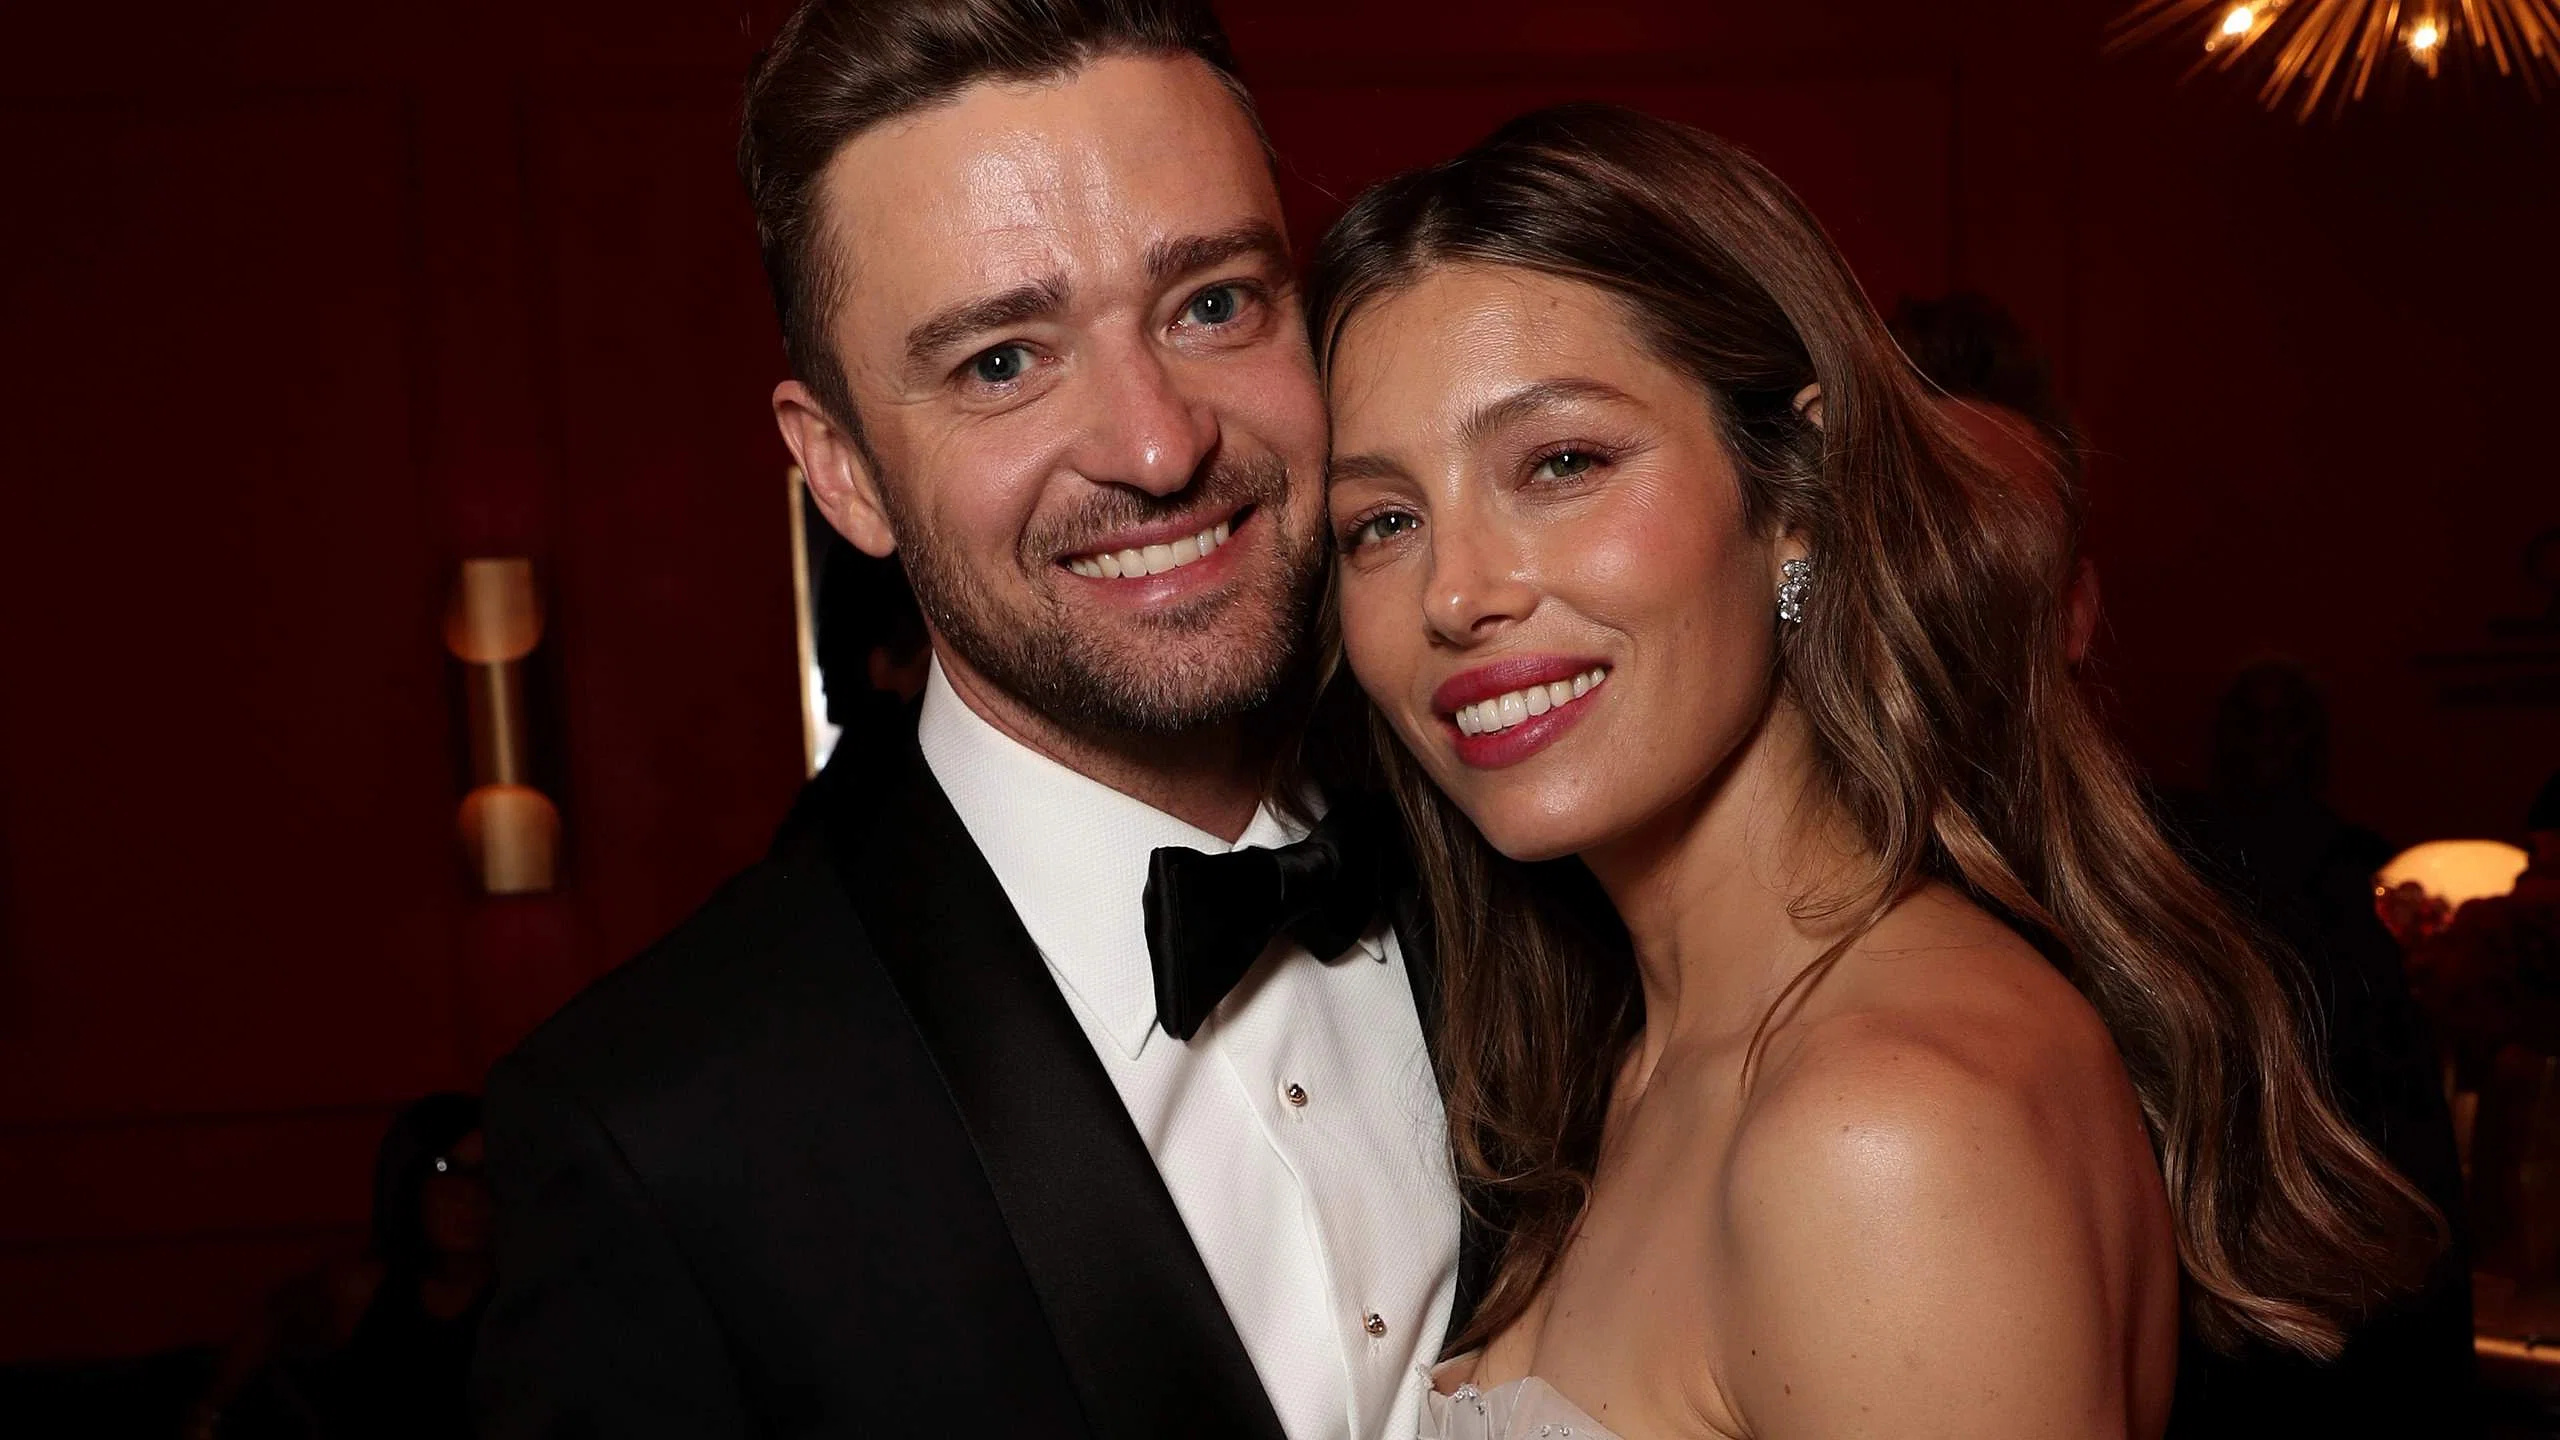 Justin Timberlake, Jessica Biel, Lapse in judgment, Controversial picture, 2560x1440 HD Desktop